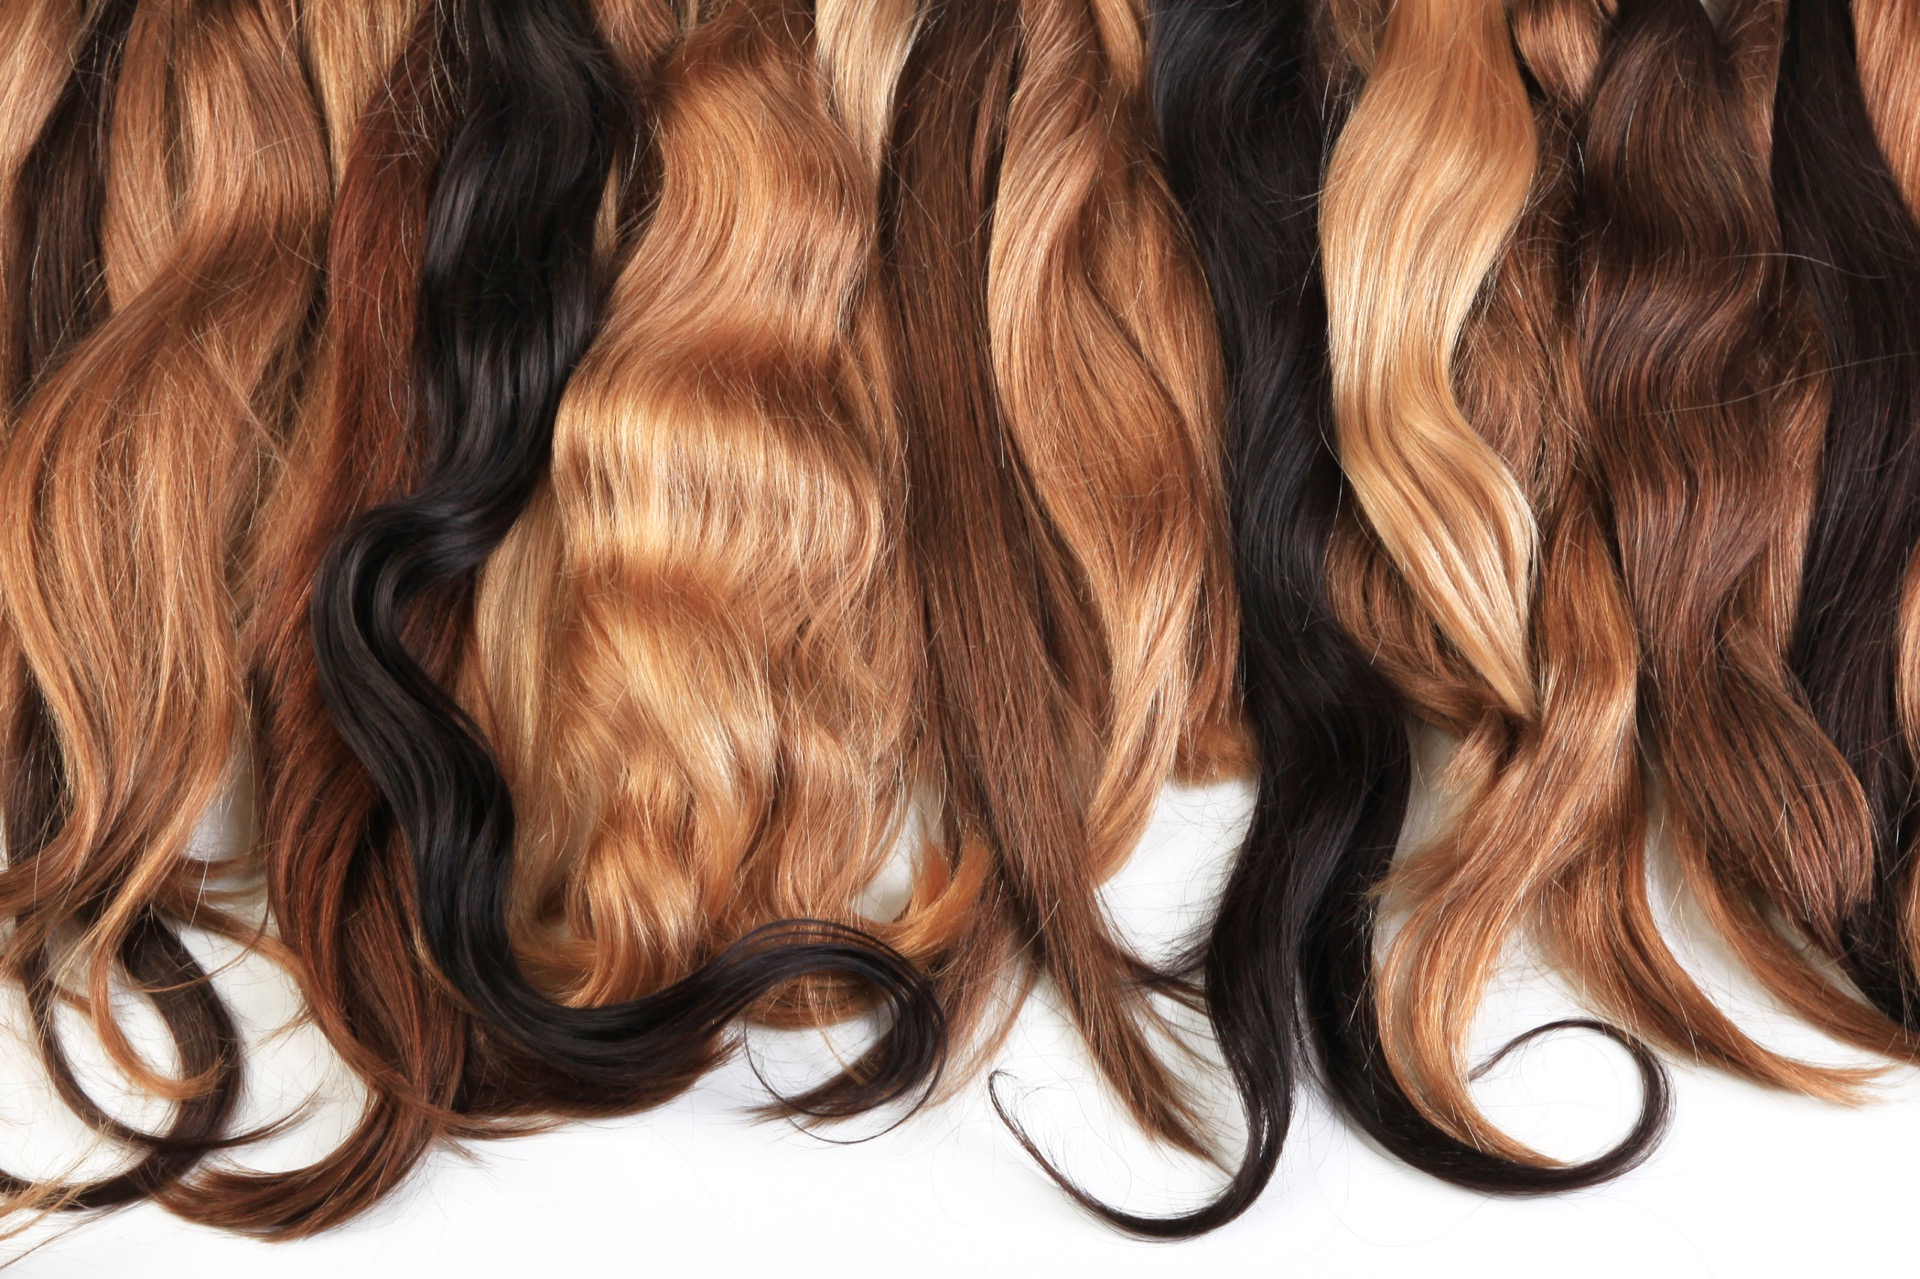 A variety of hair extensions